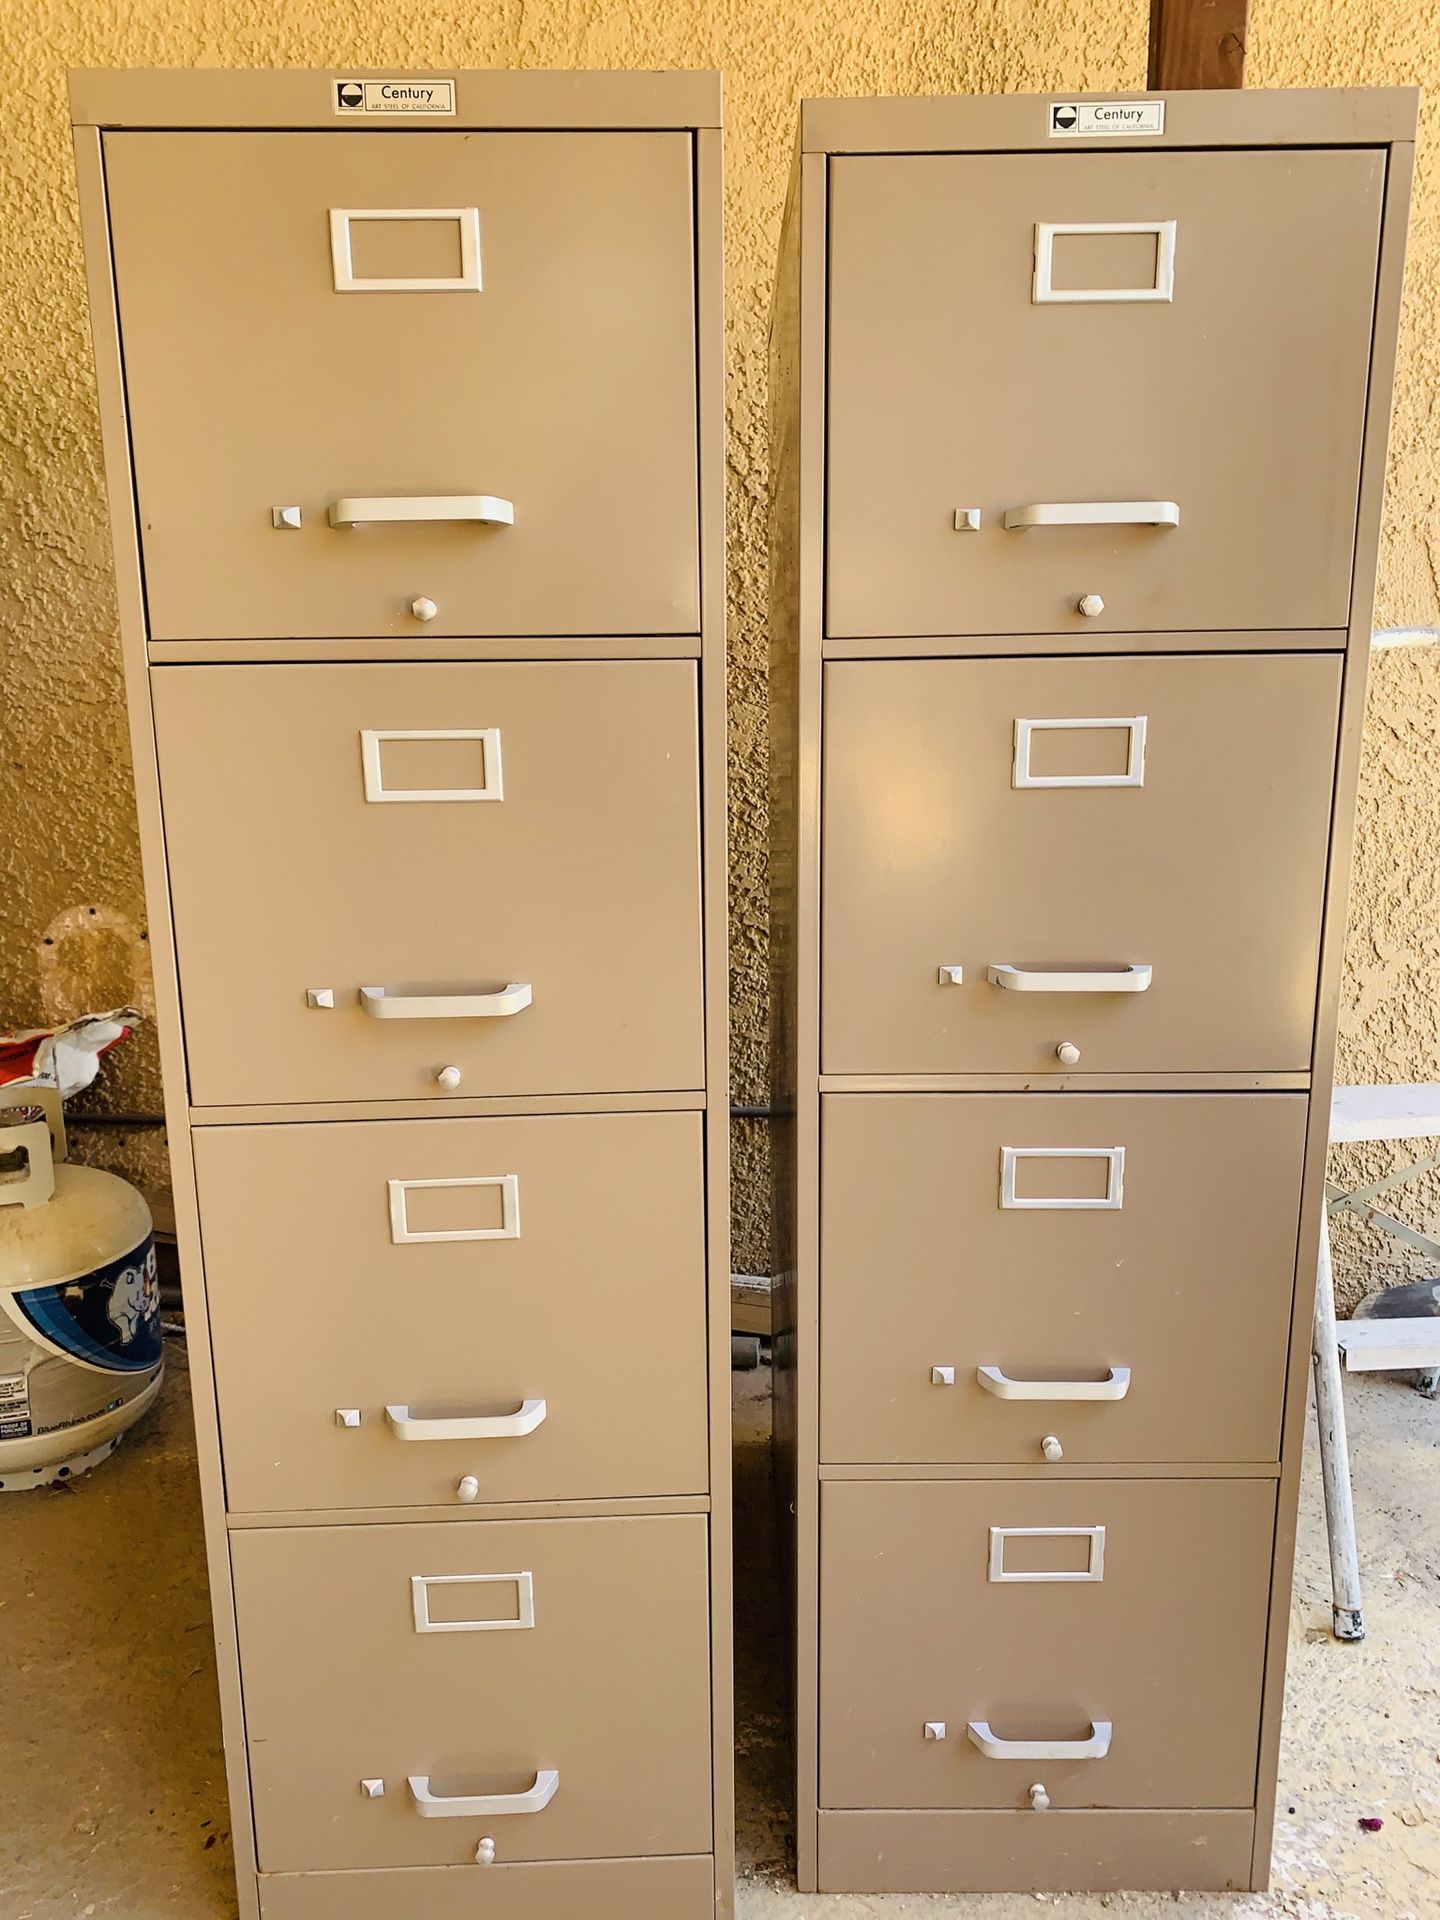 FILING CABINET (2 PIECES)